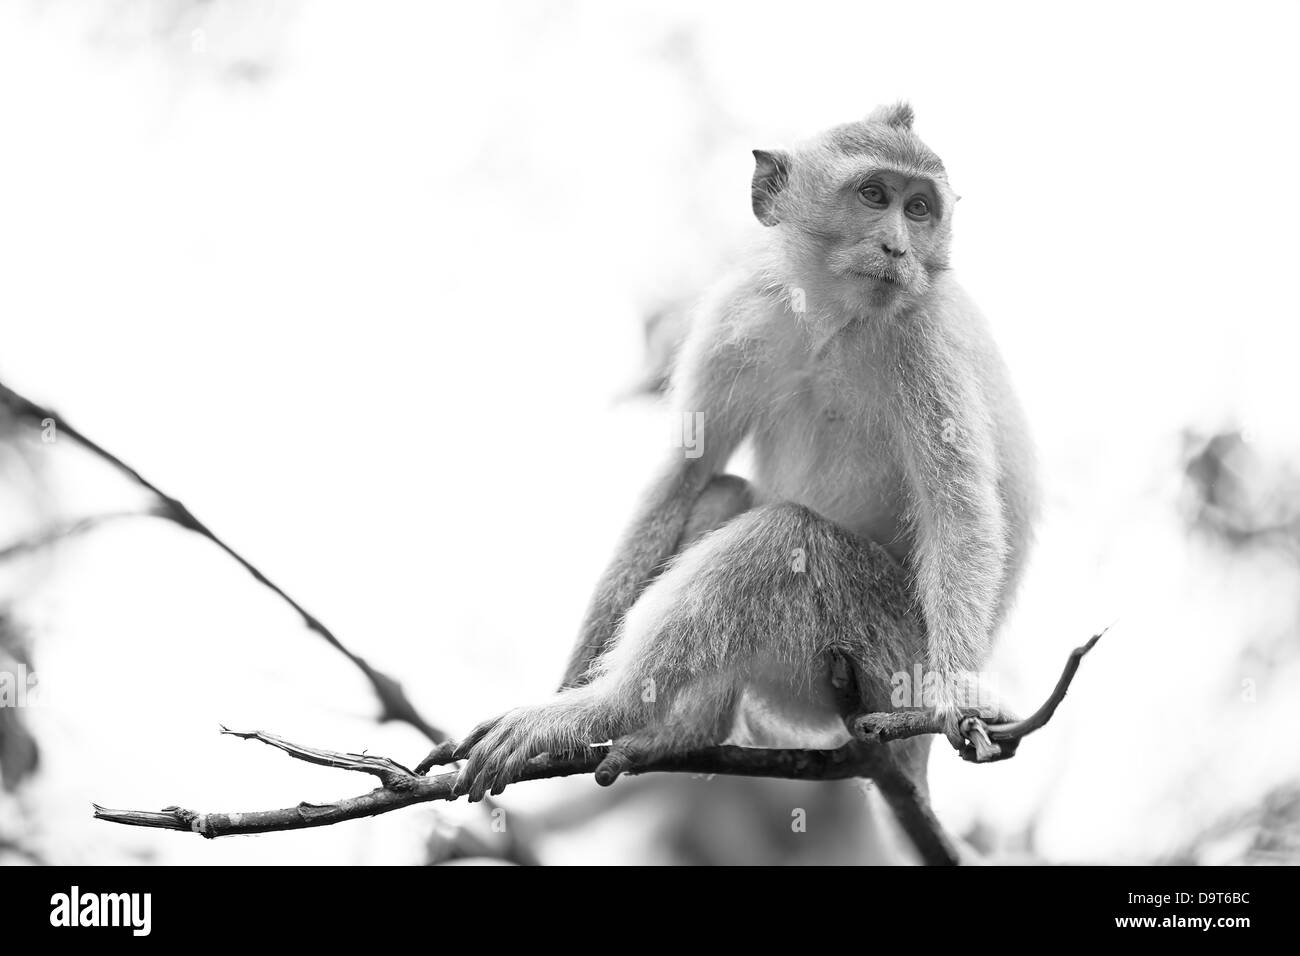 Long-tailed Macaque Monkey Stock Photo